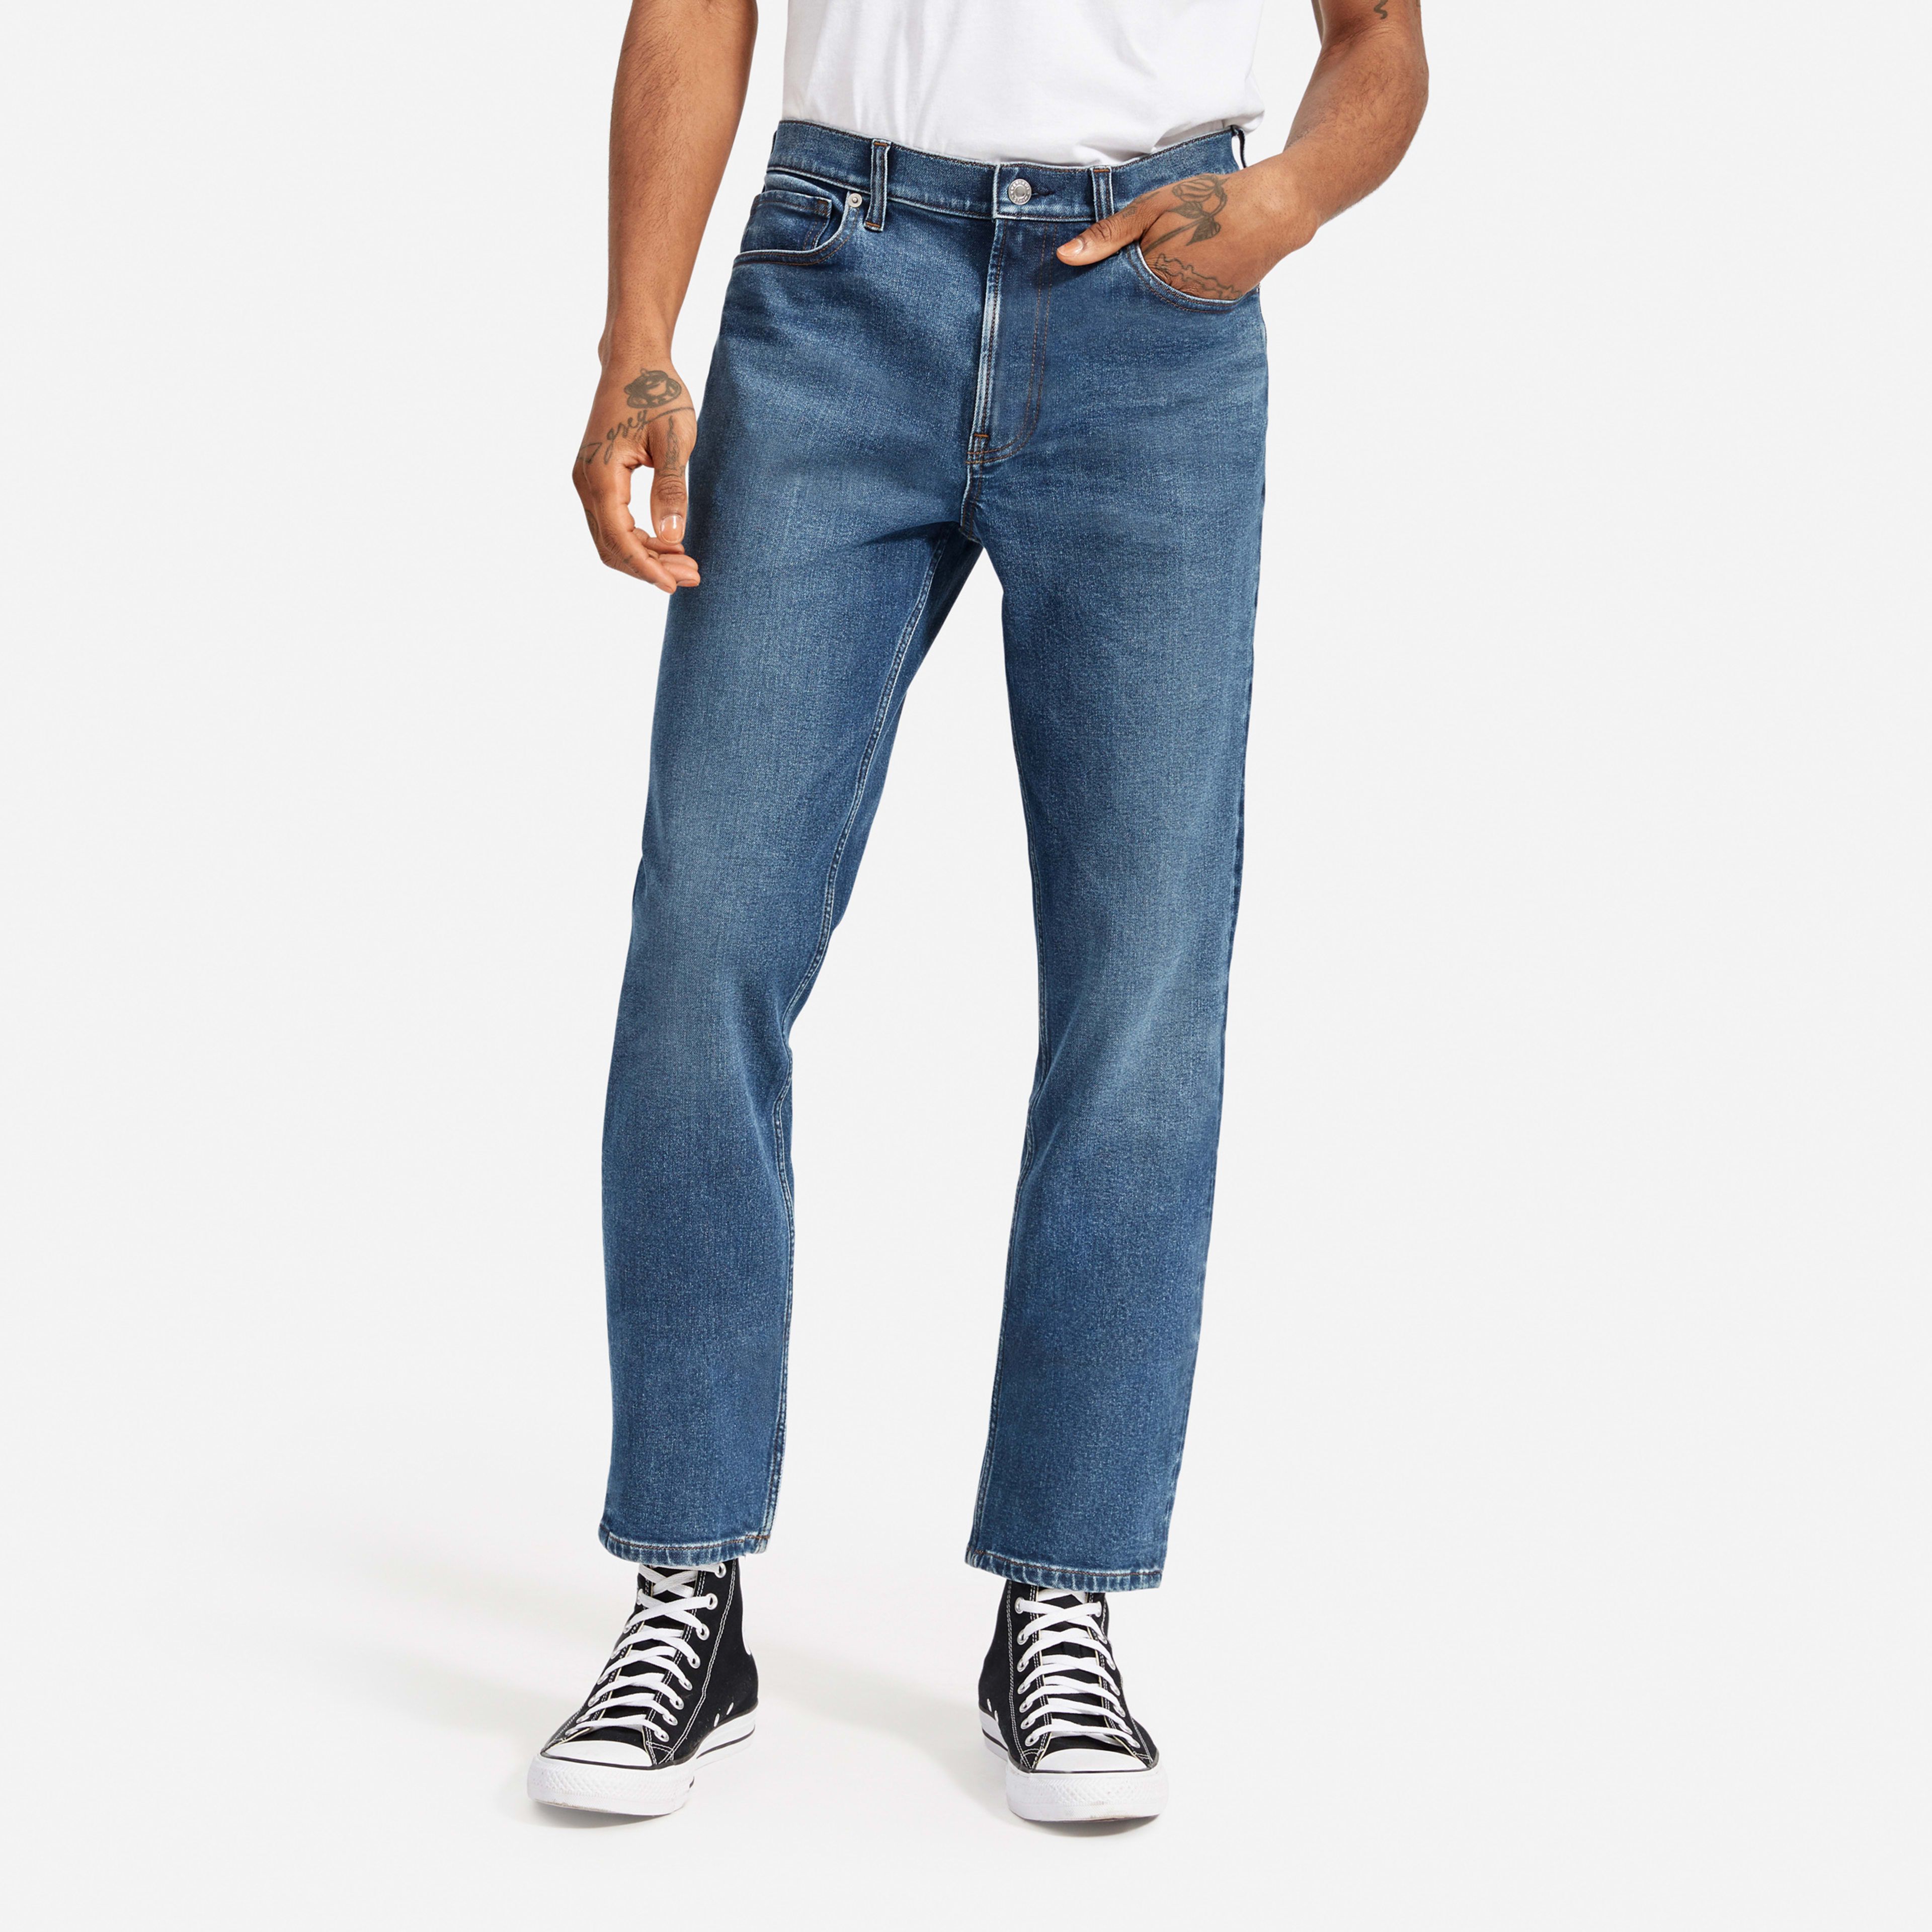 Everlane Relaxed 4-Way Stretch Organic Jean